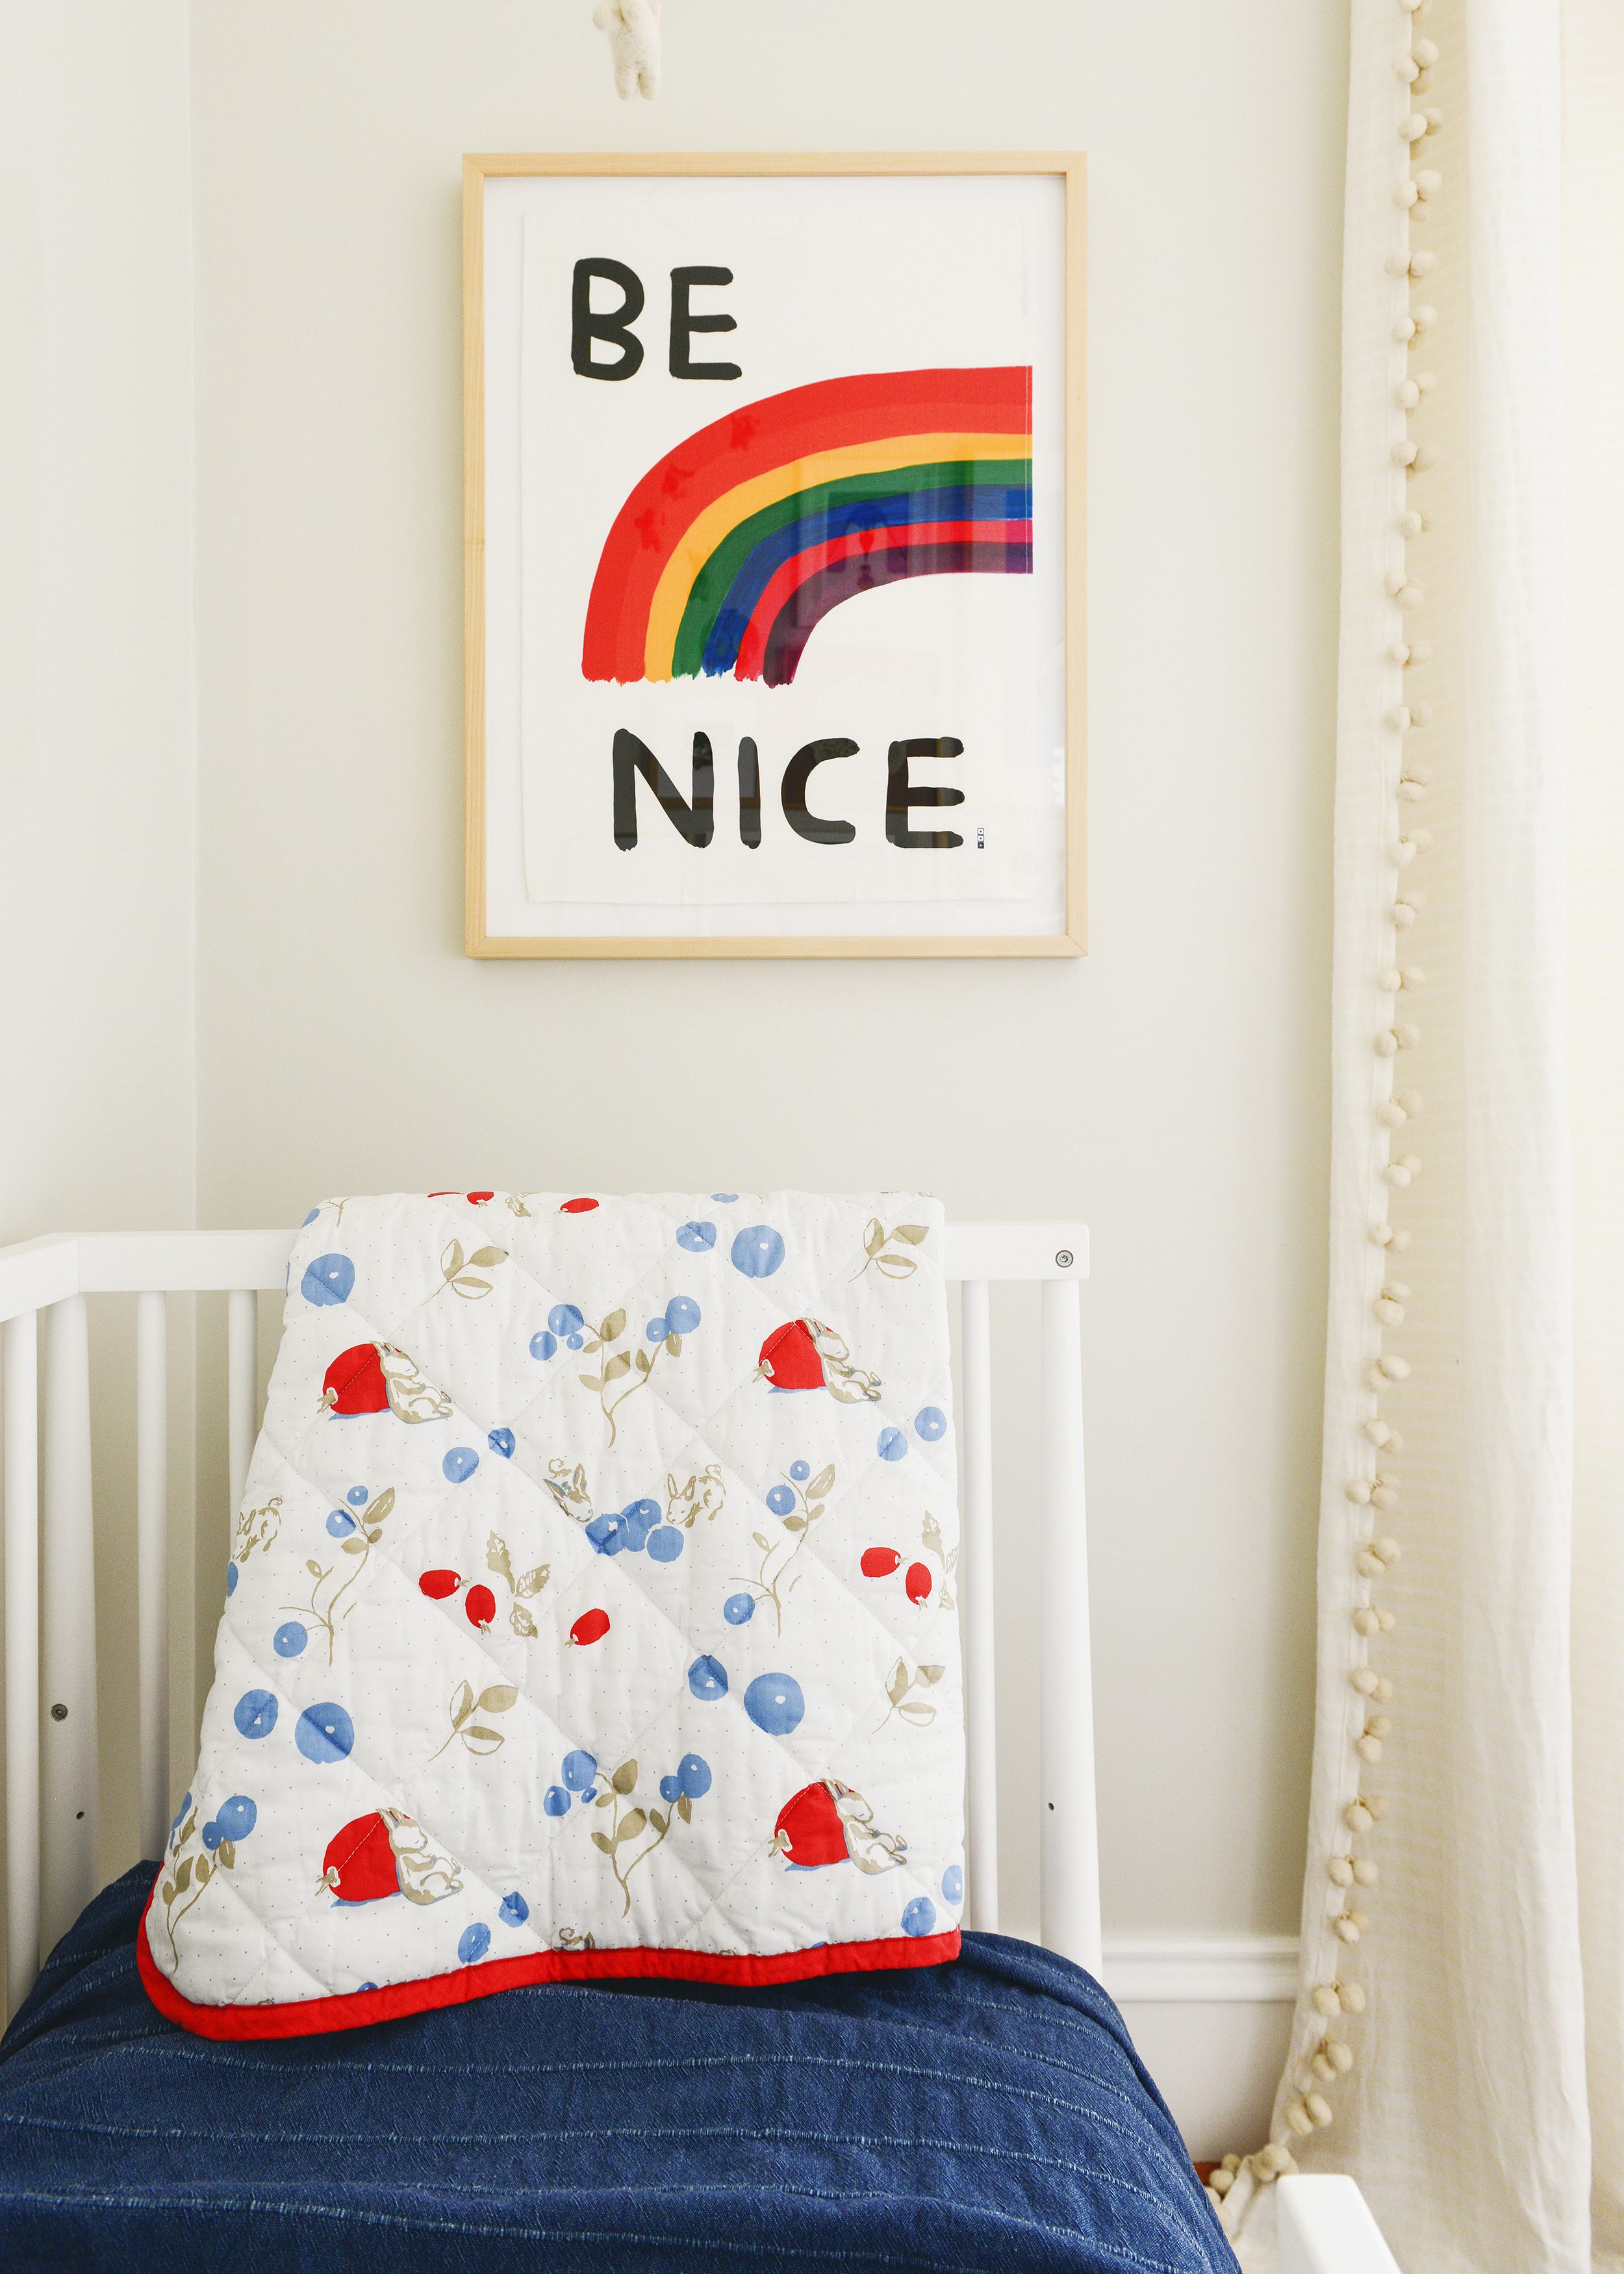 Detail shot of bedding on a crib with a toddler rail, IKEA bedding | via Yellow Brick Home